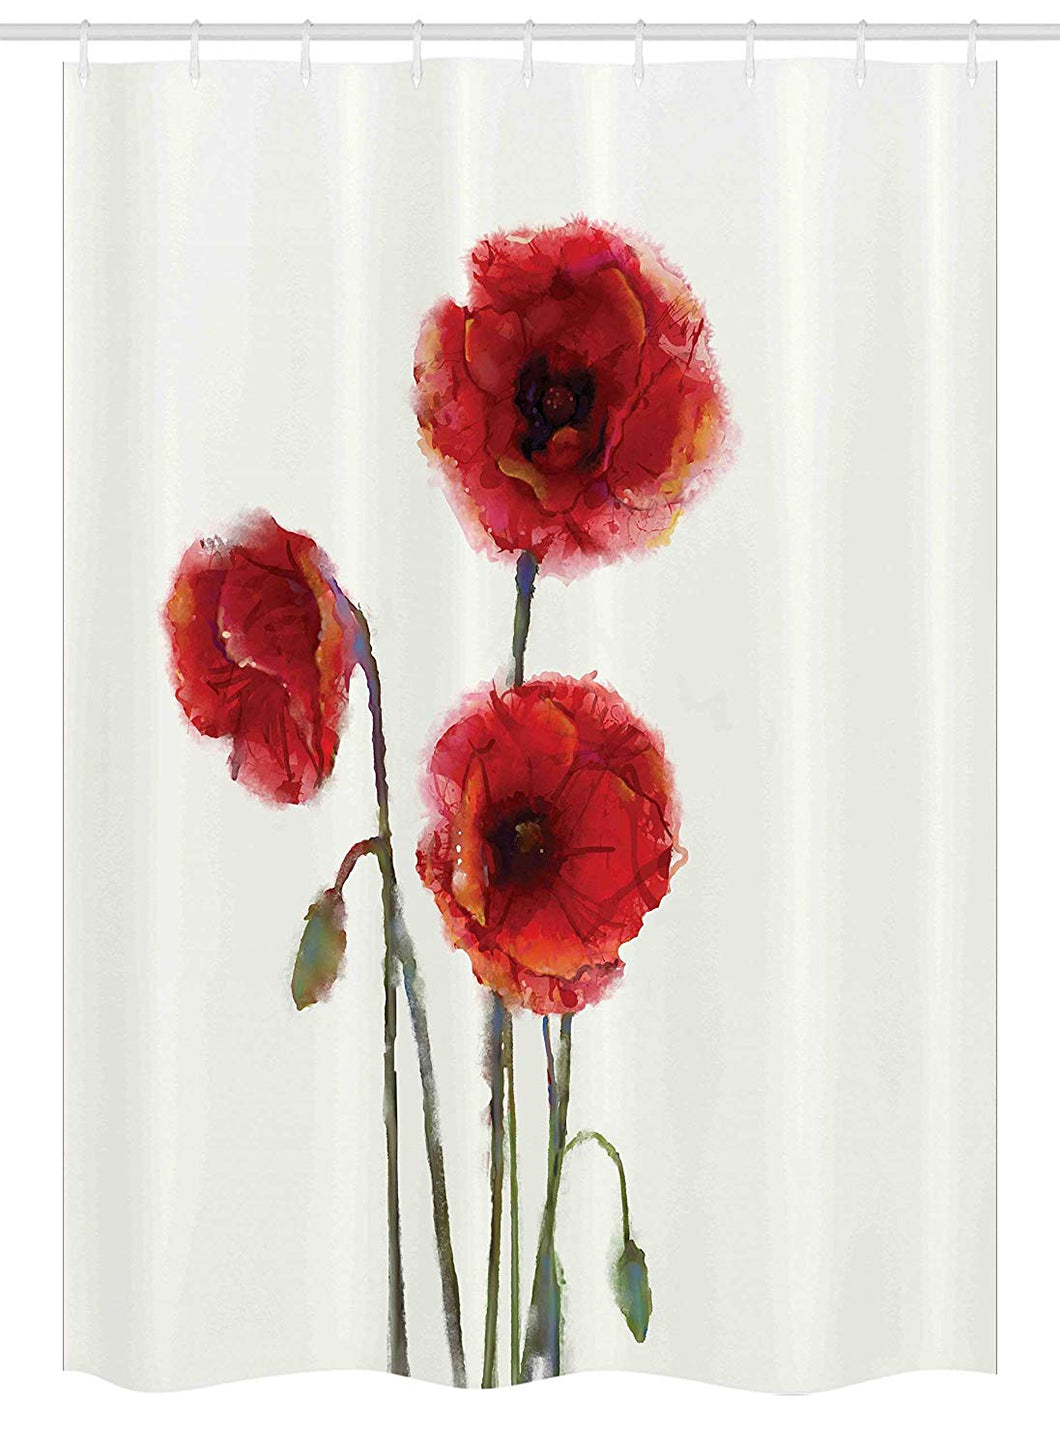 Ambesonne Watercolor Flower Stall Shower Curtain, Poppy Flowers Spring Blossoms with Watercolor Painting Effect, Fabric Bathroom Decor Set with Hooks, 54 W x 78 L inches, White Red Sage Green